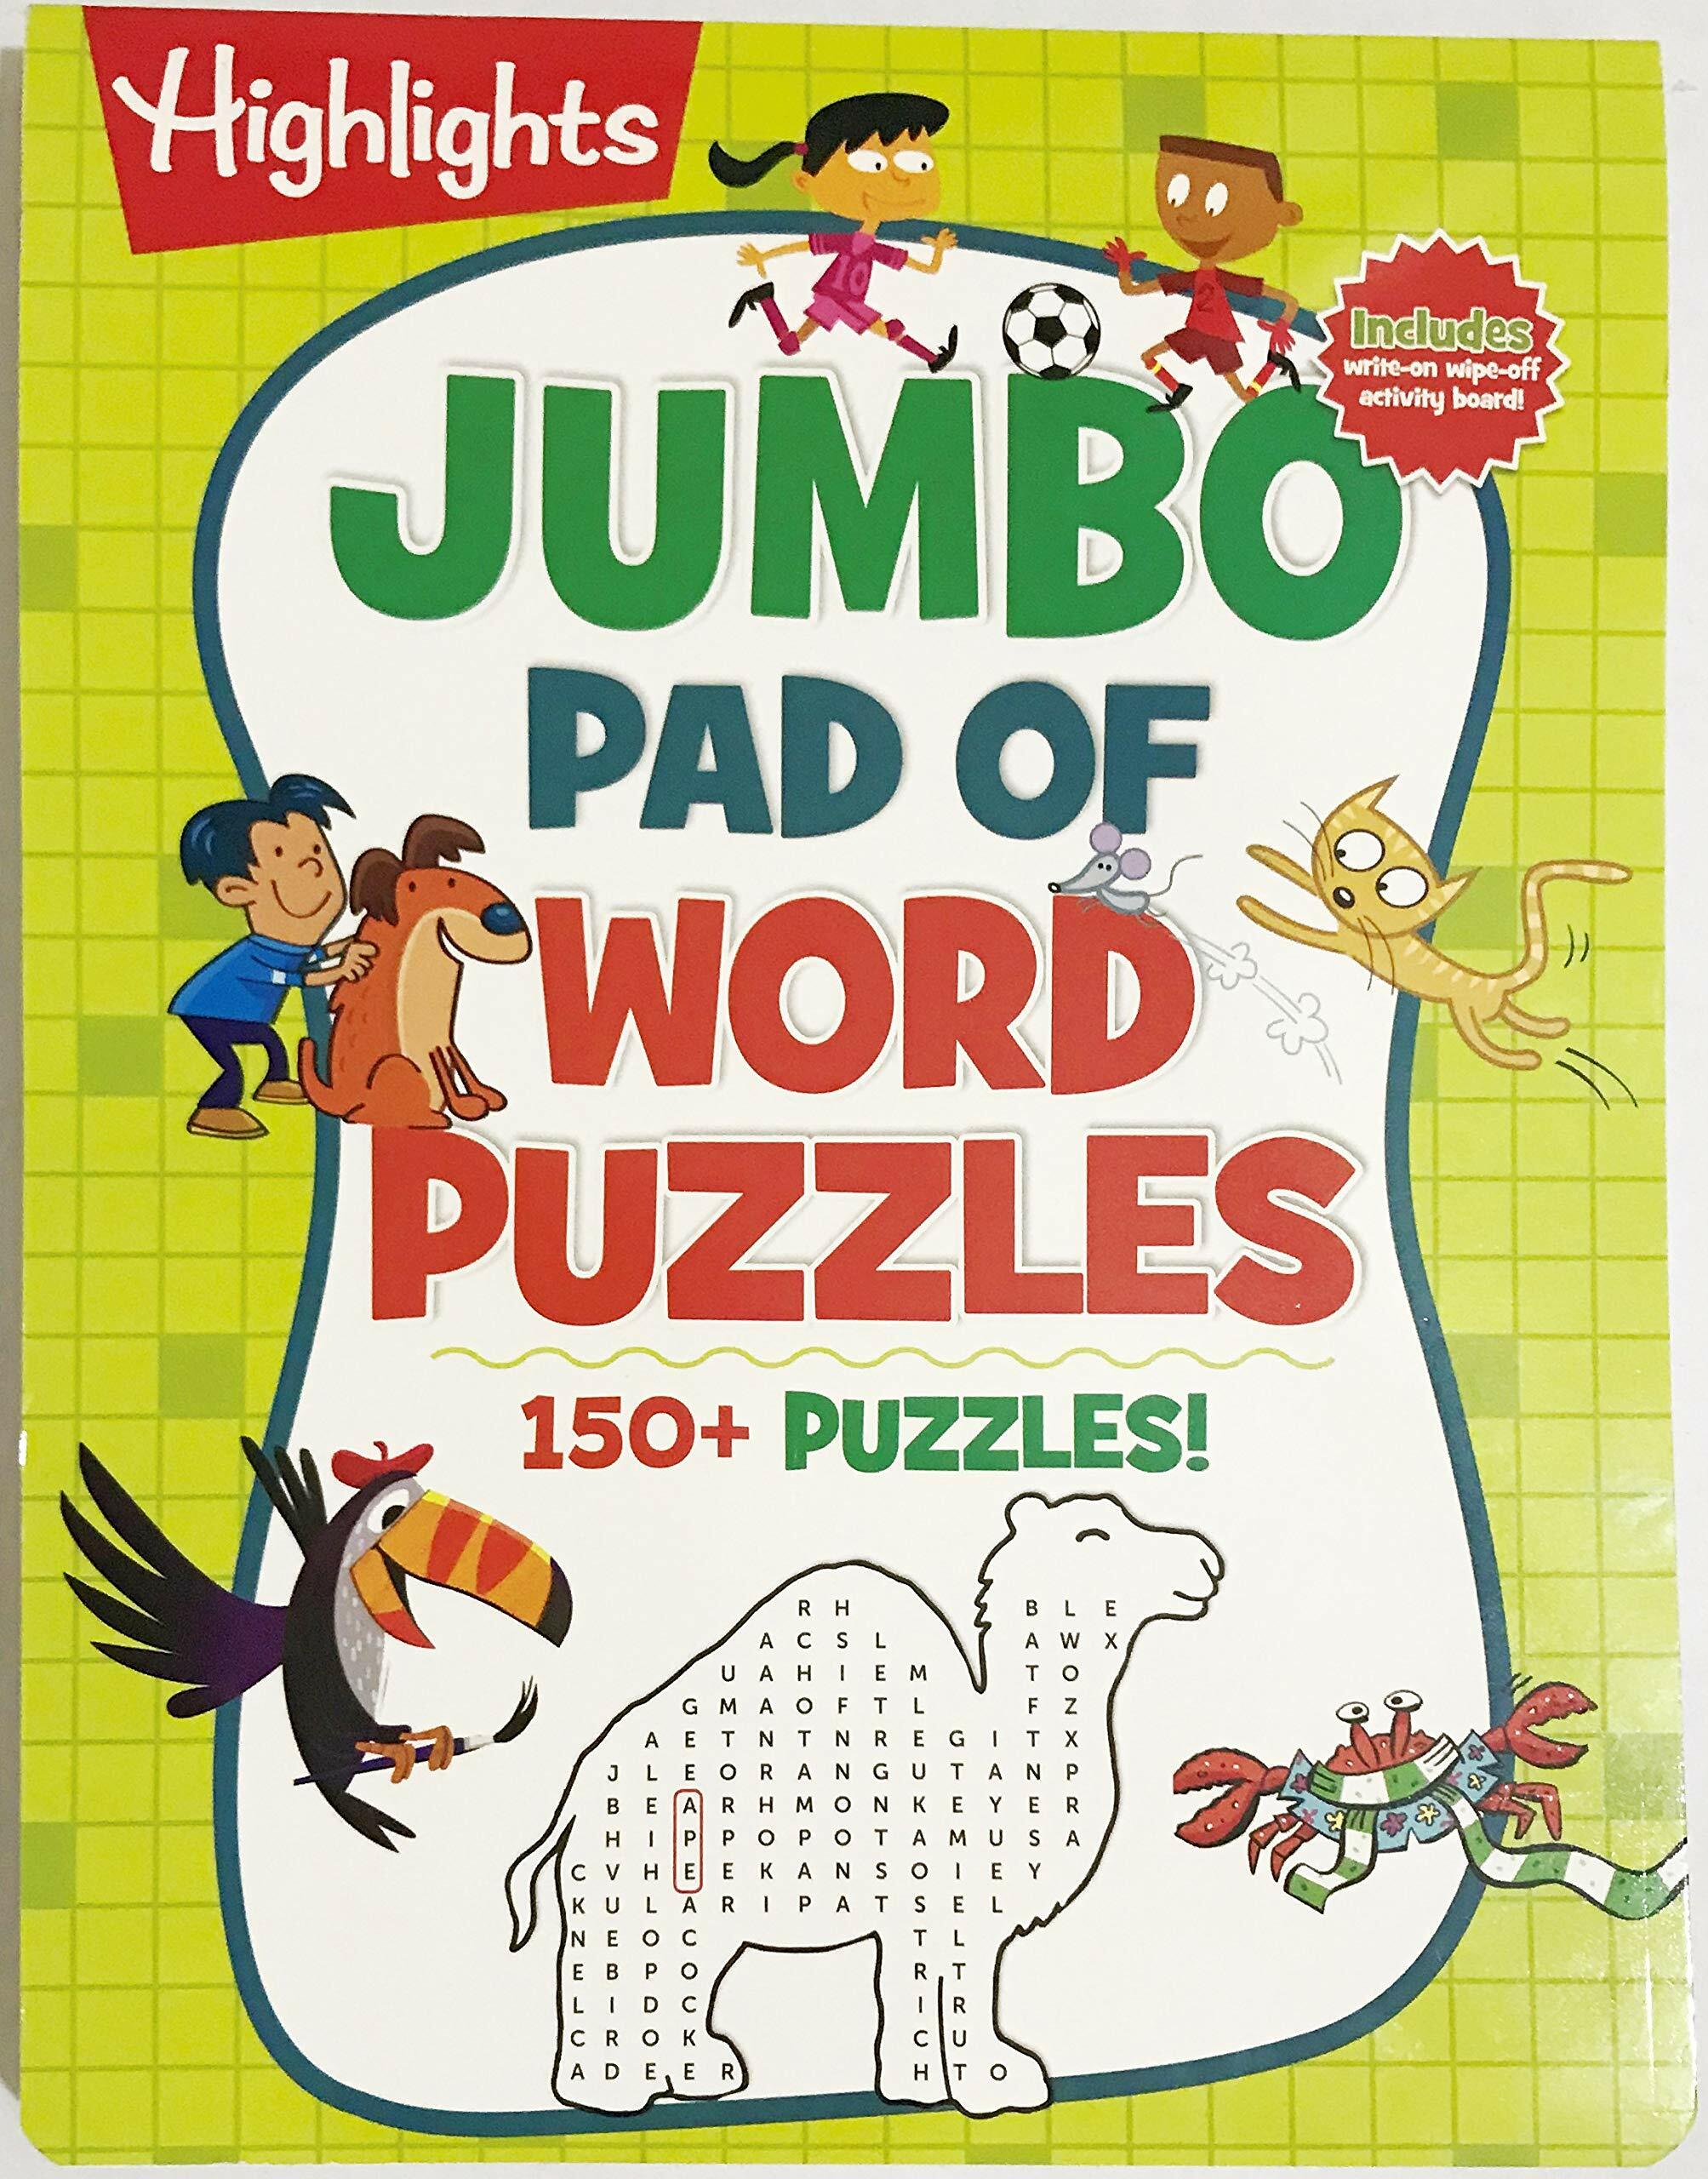 Highlights Jumbo pad of word puzzles 150+ puzzles! (Paperback)